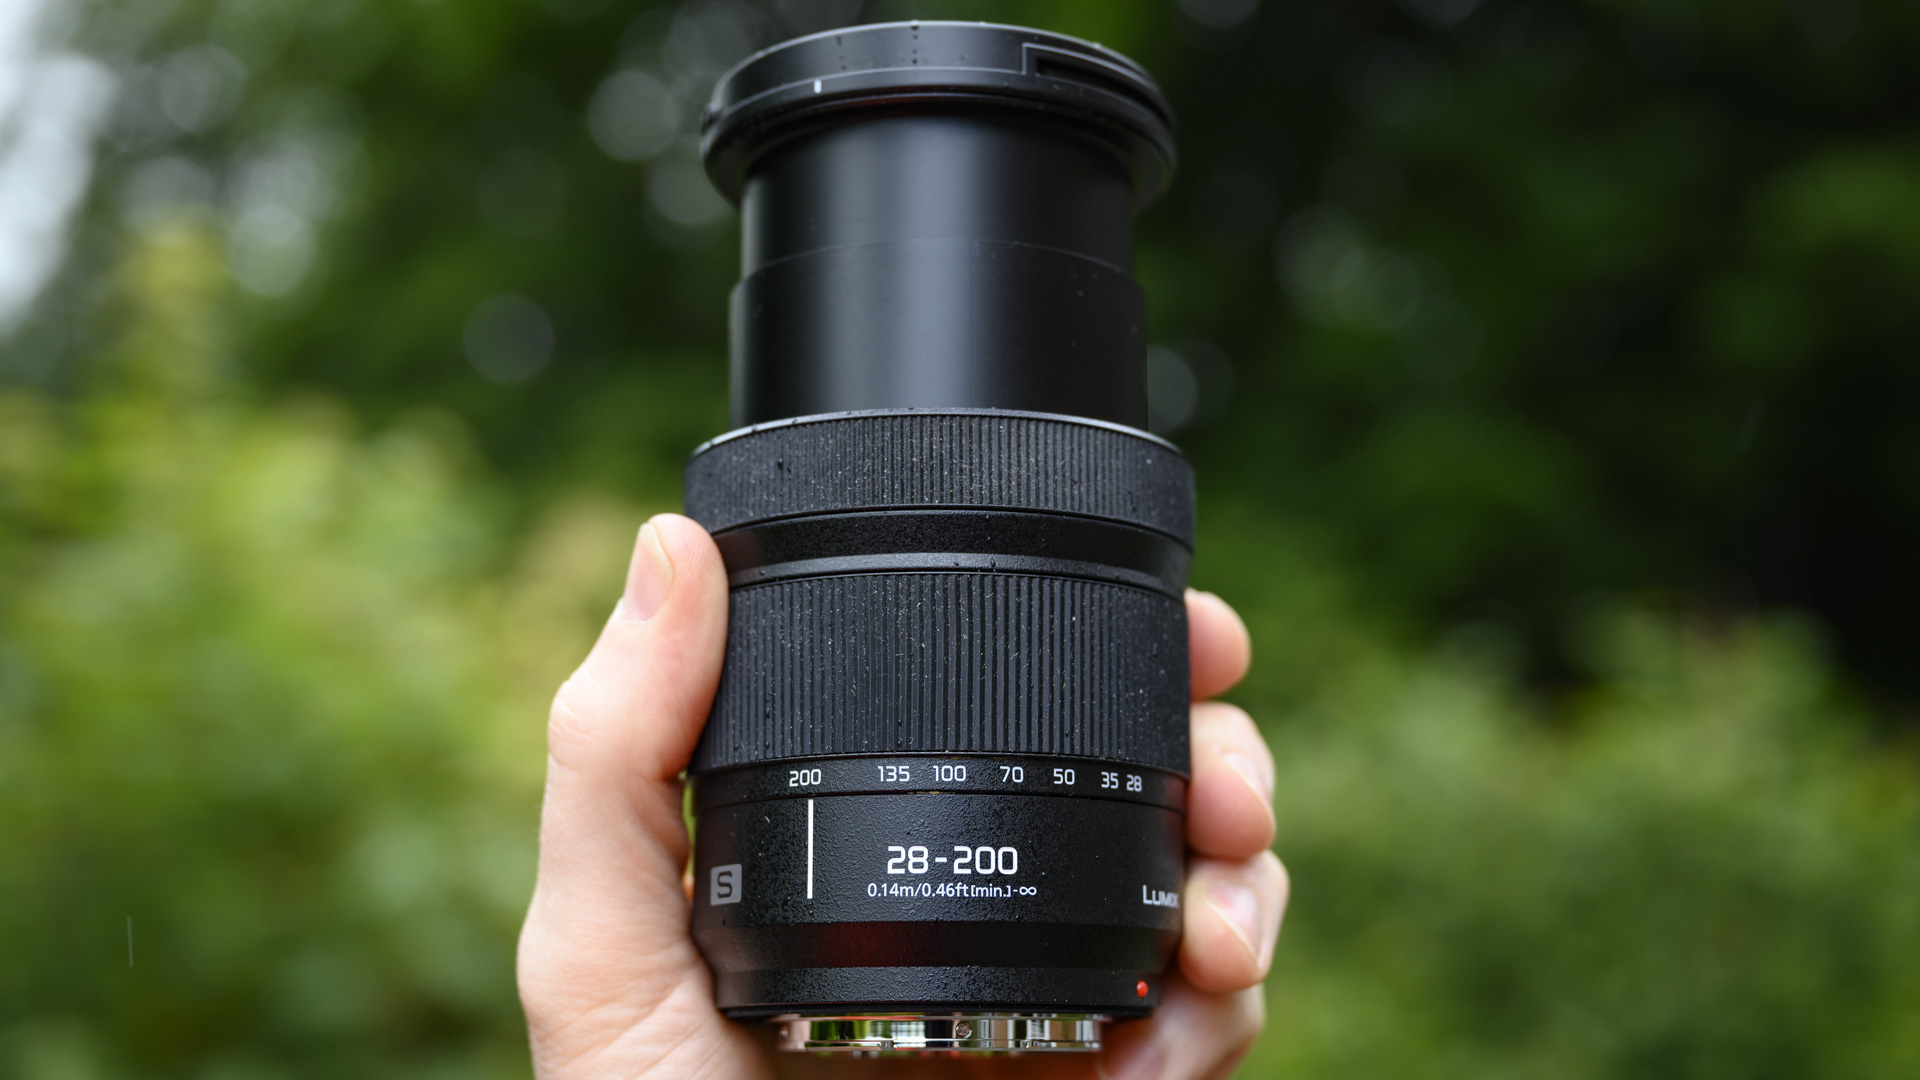 Panasonic Lumix S 28-200mm travel lens in the hand with leafy background and light rain